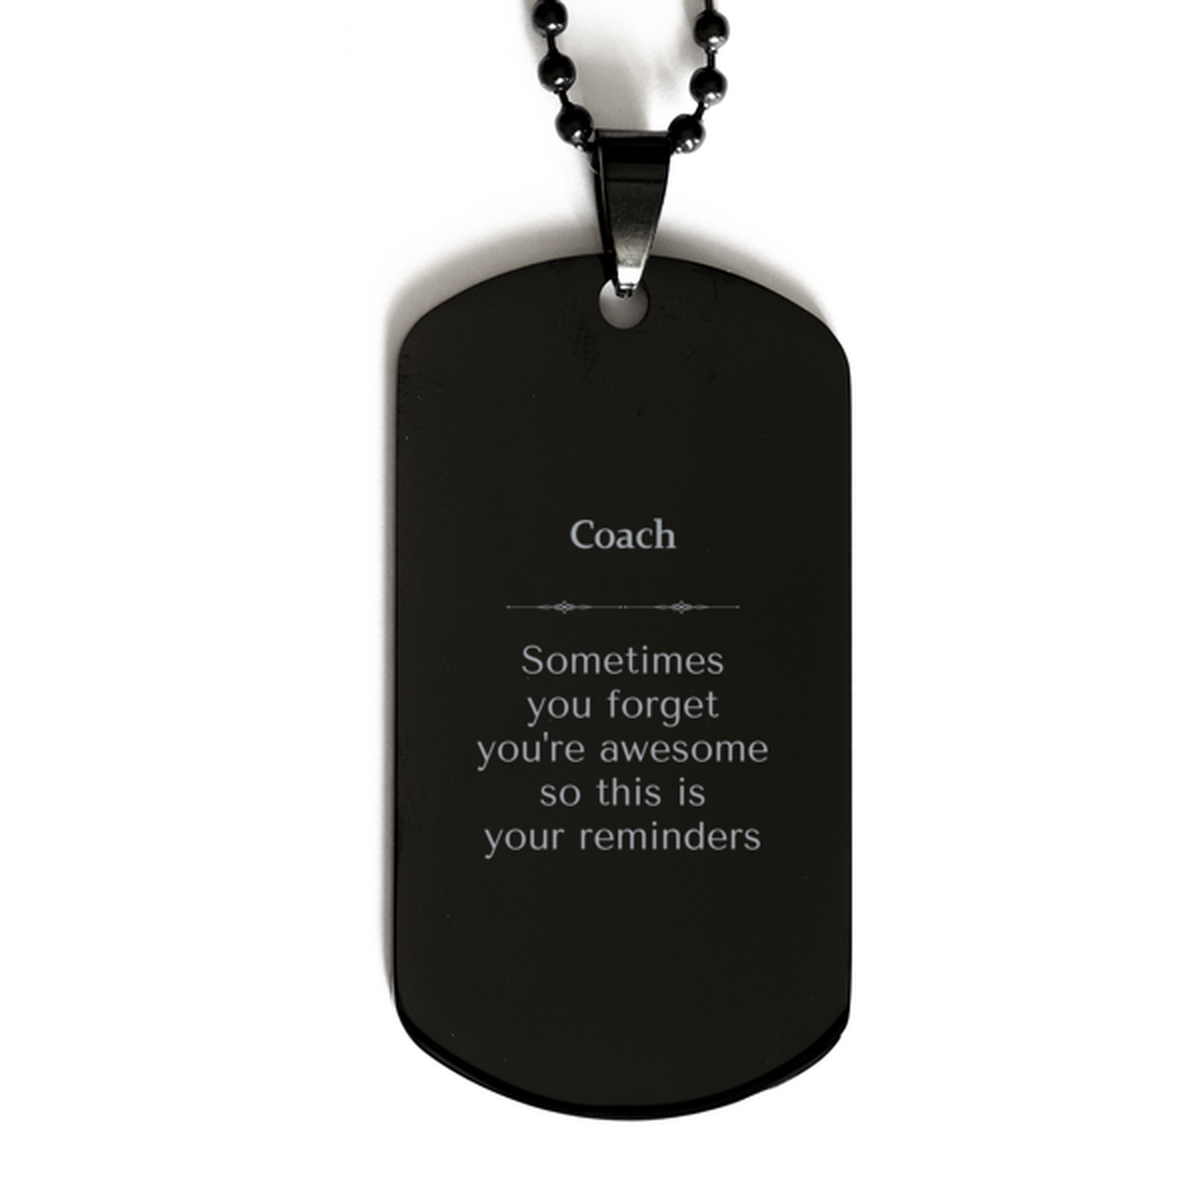 Sentimental Coach Black Dog Tag, Coach Sometimes you forget you're awesome so this is your reminders, Graduation Christmas Birthday Gifts for Coach, Men, Women, Coworkers